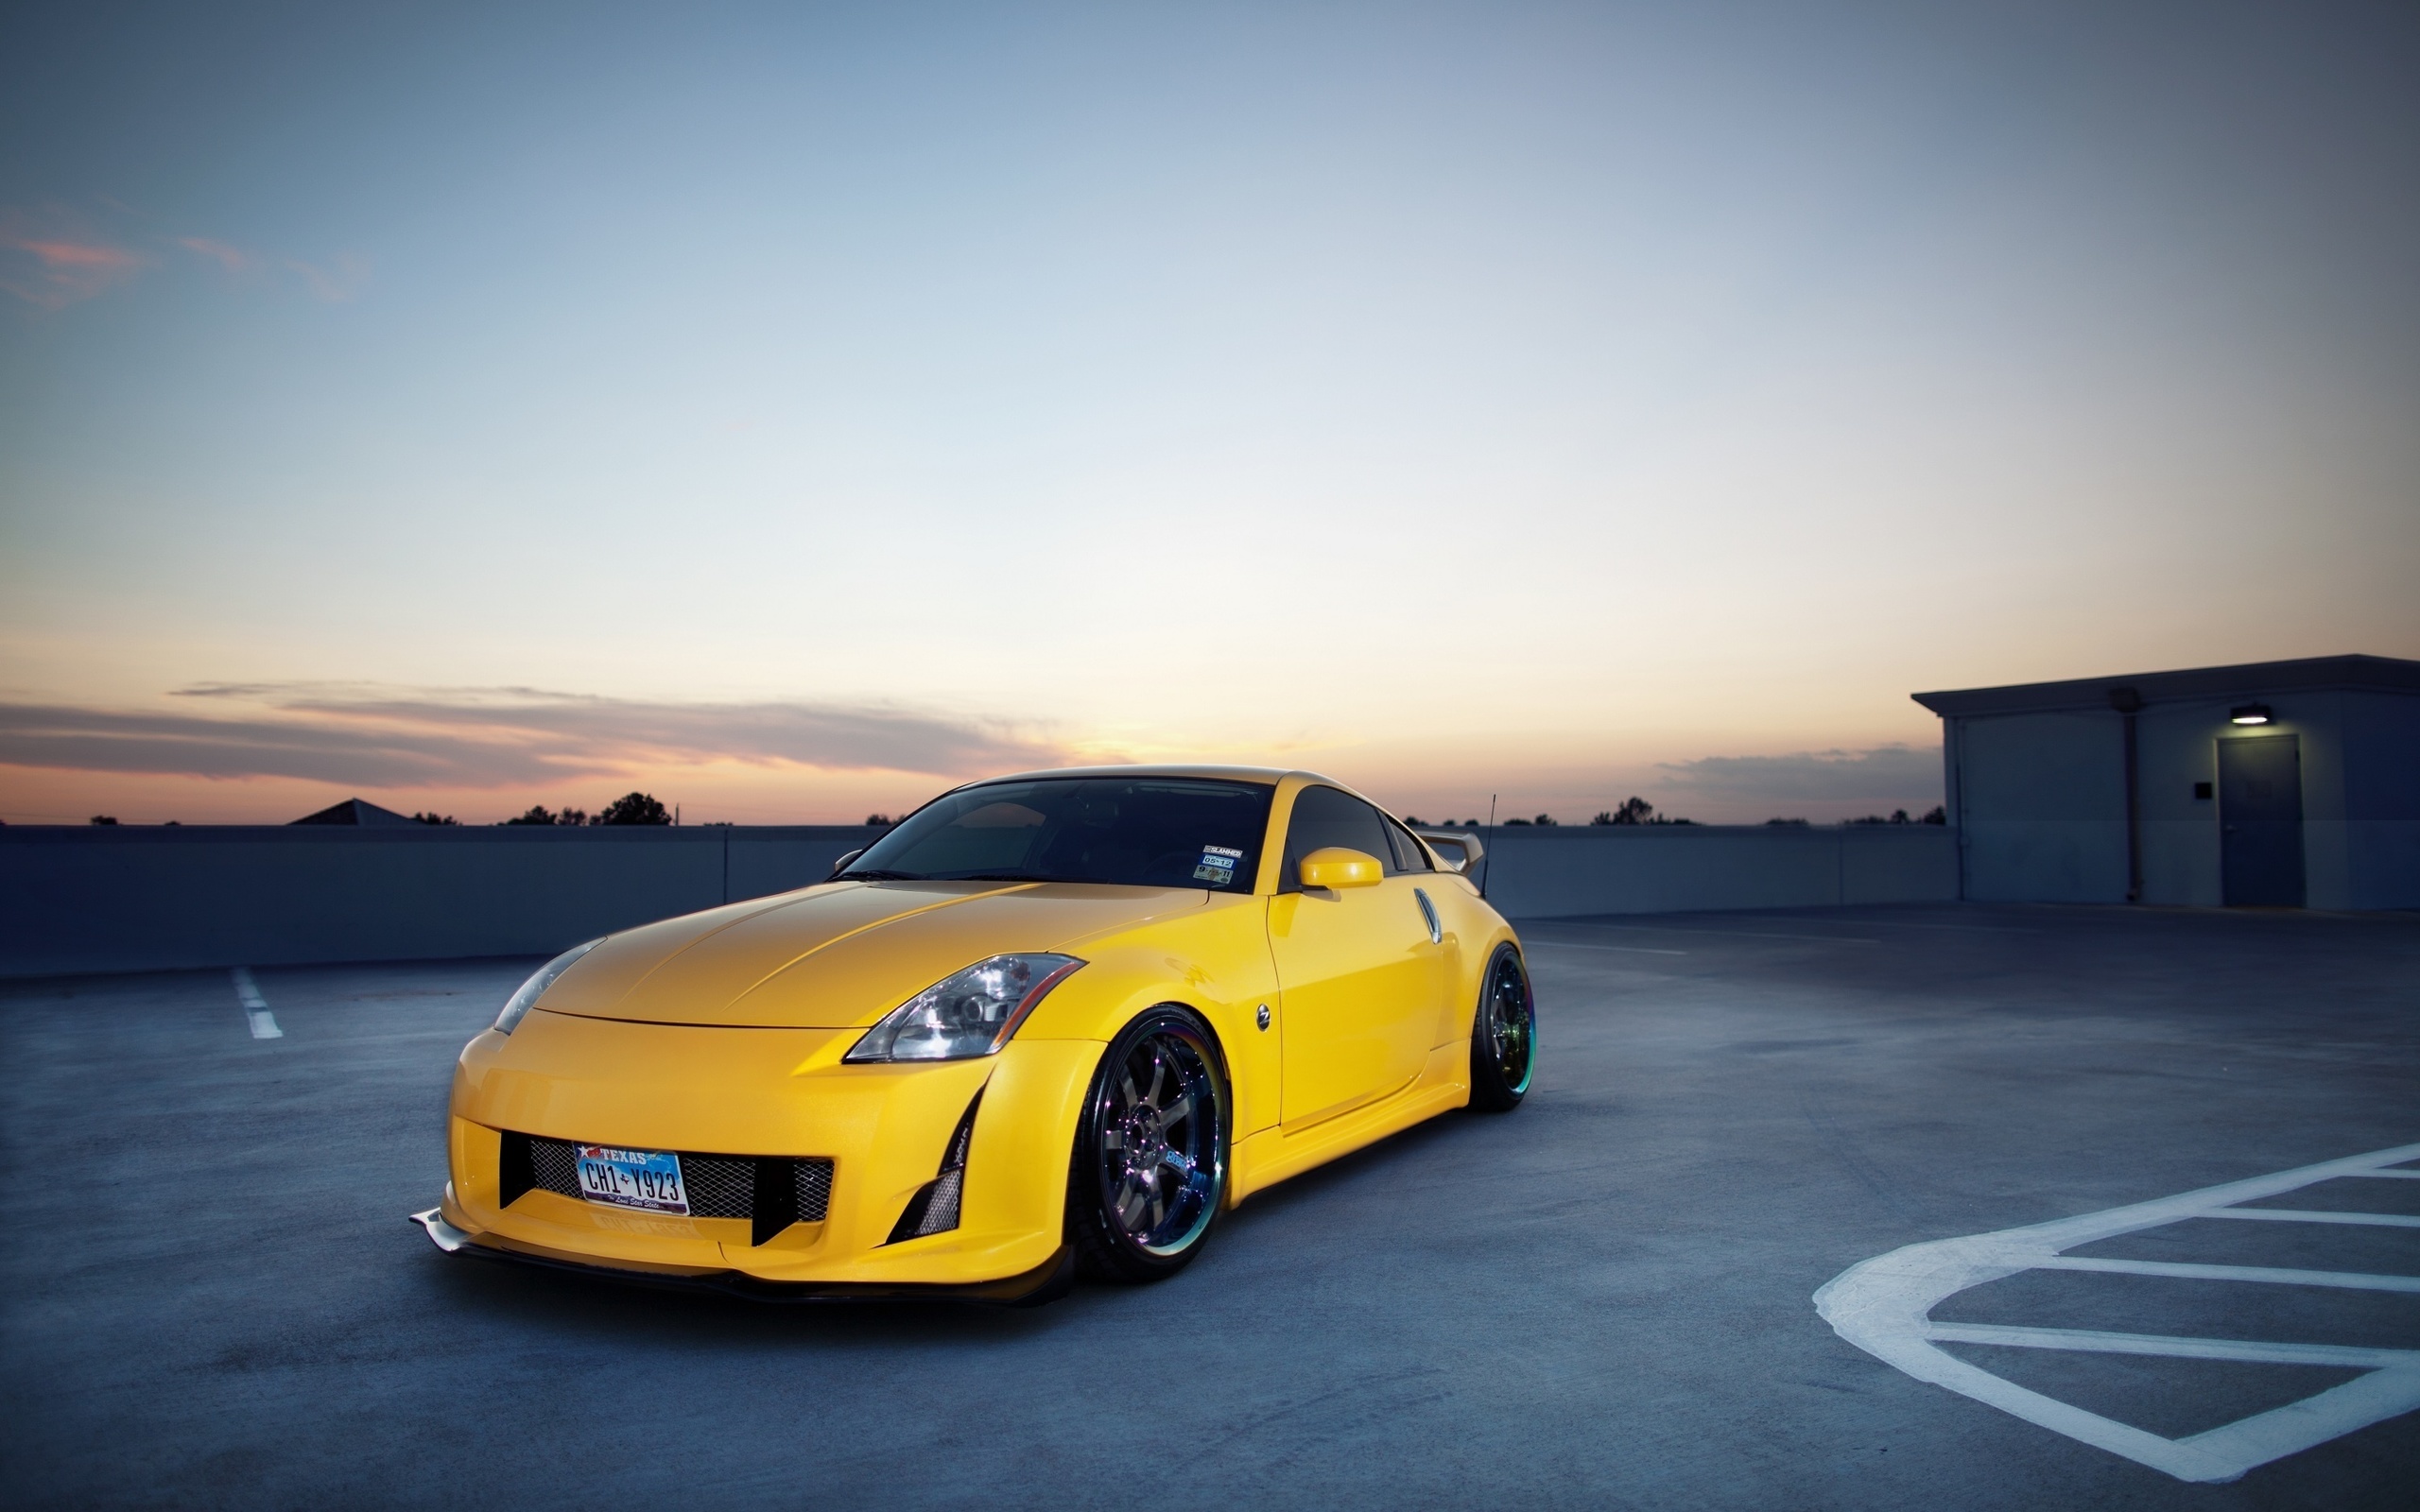 350z, tuning, tuning auto, parking, photo, Auto, city, nissan 350z, cars, nissan, wallpapers auto